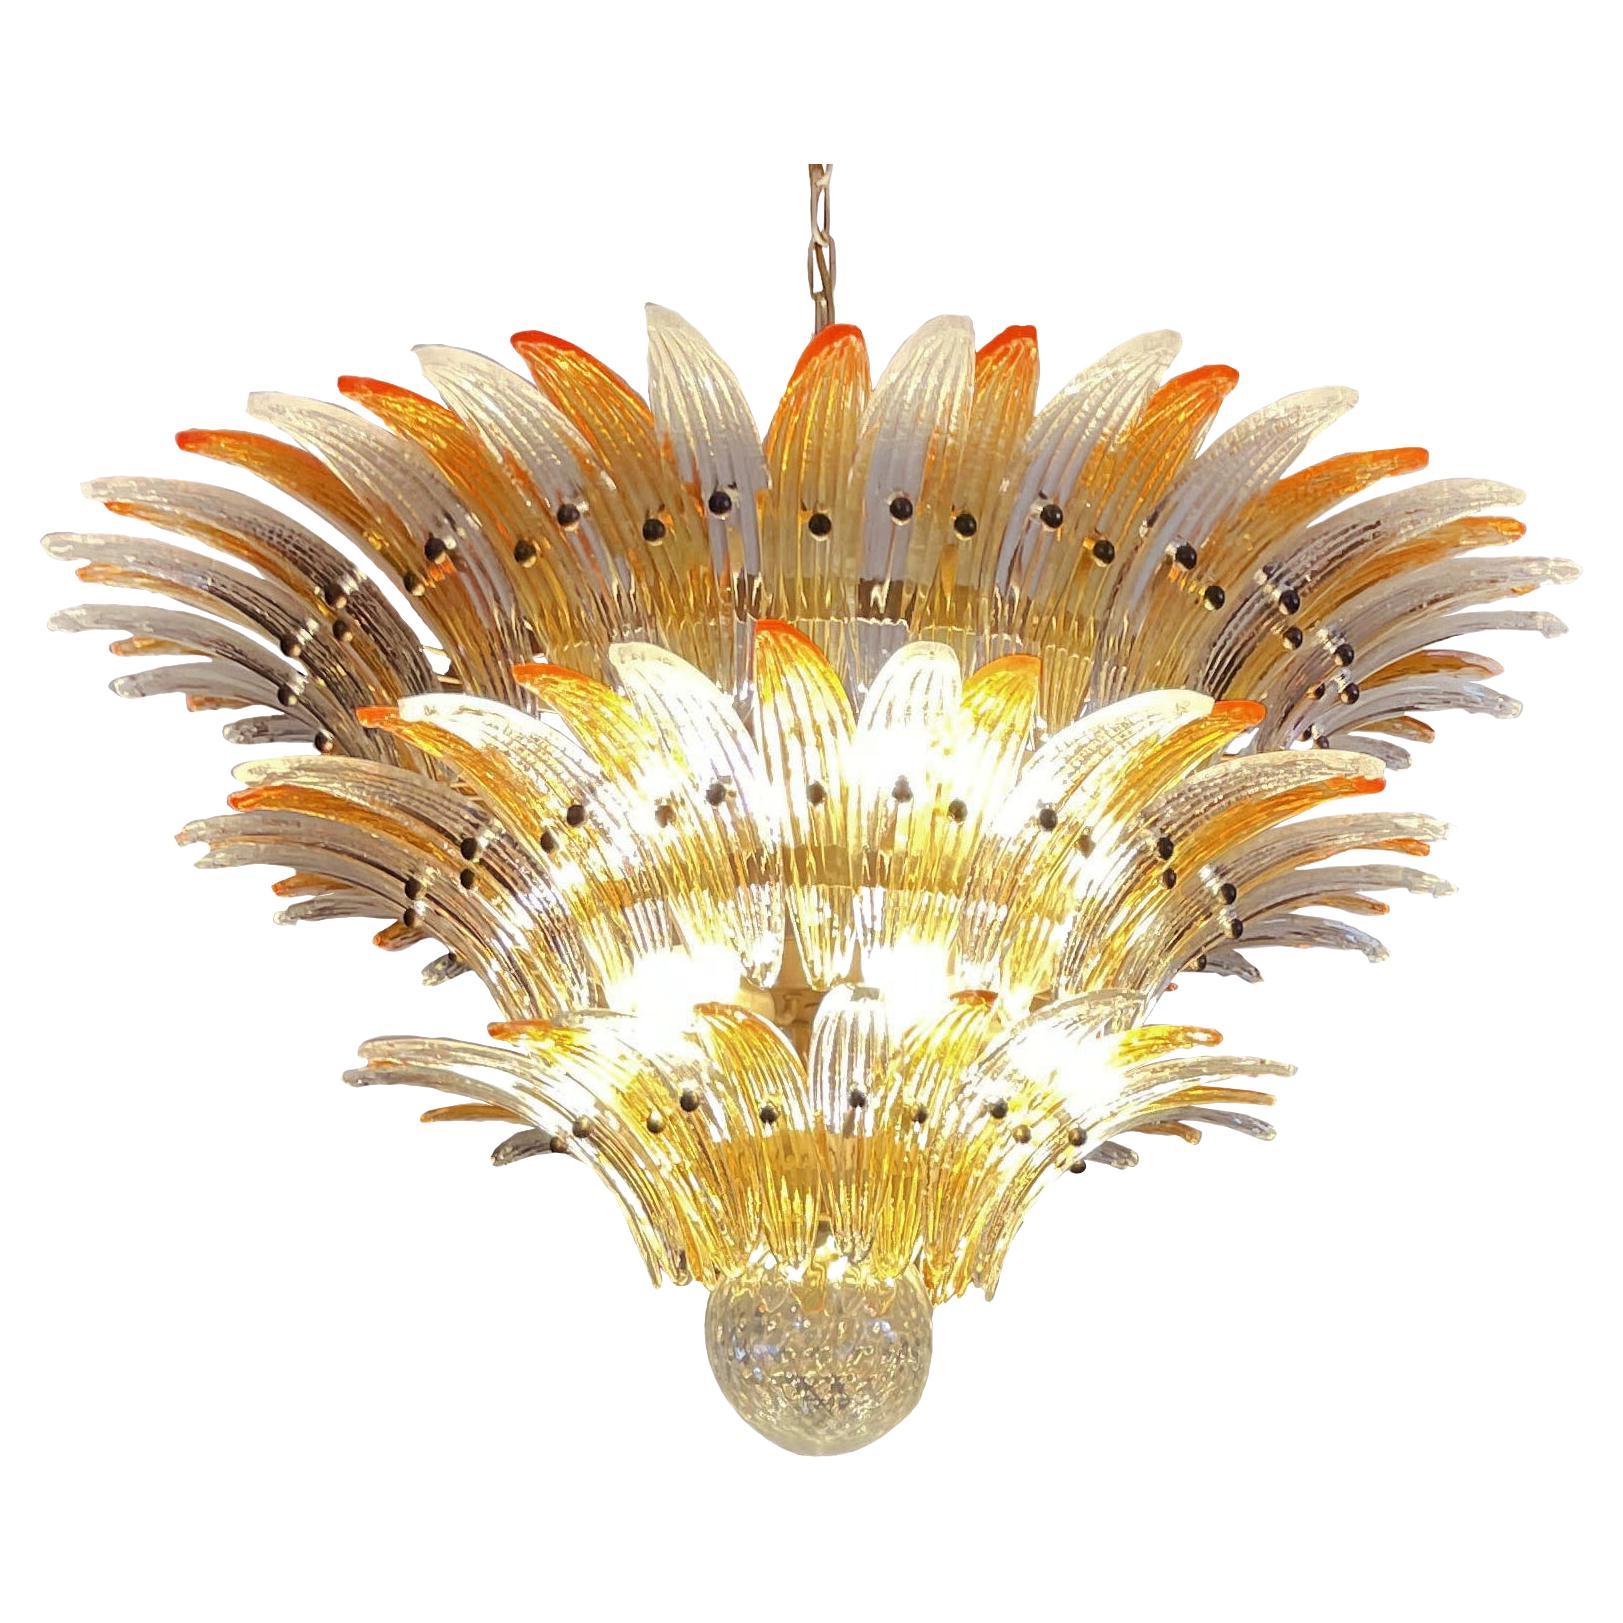 Palmette ceiling light made by 104 Murano clear and amber glasses in a gold metal frame. Murano blown glass in a traditional way. Structure in gold colored metal.
Period:1980's
Dimensions:47,25 inches (120 cm) height with chain; 25,60 inches (65